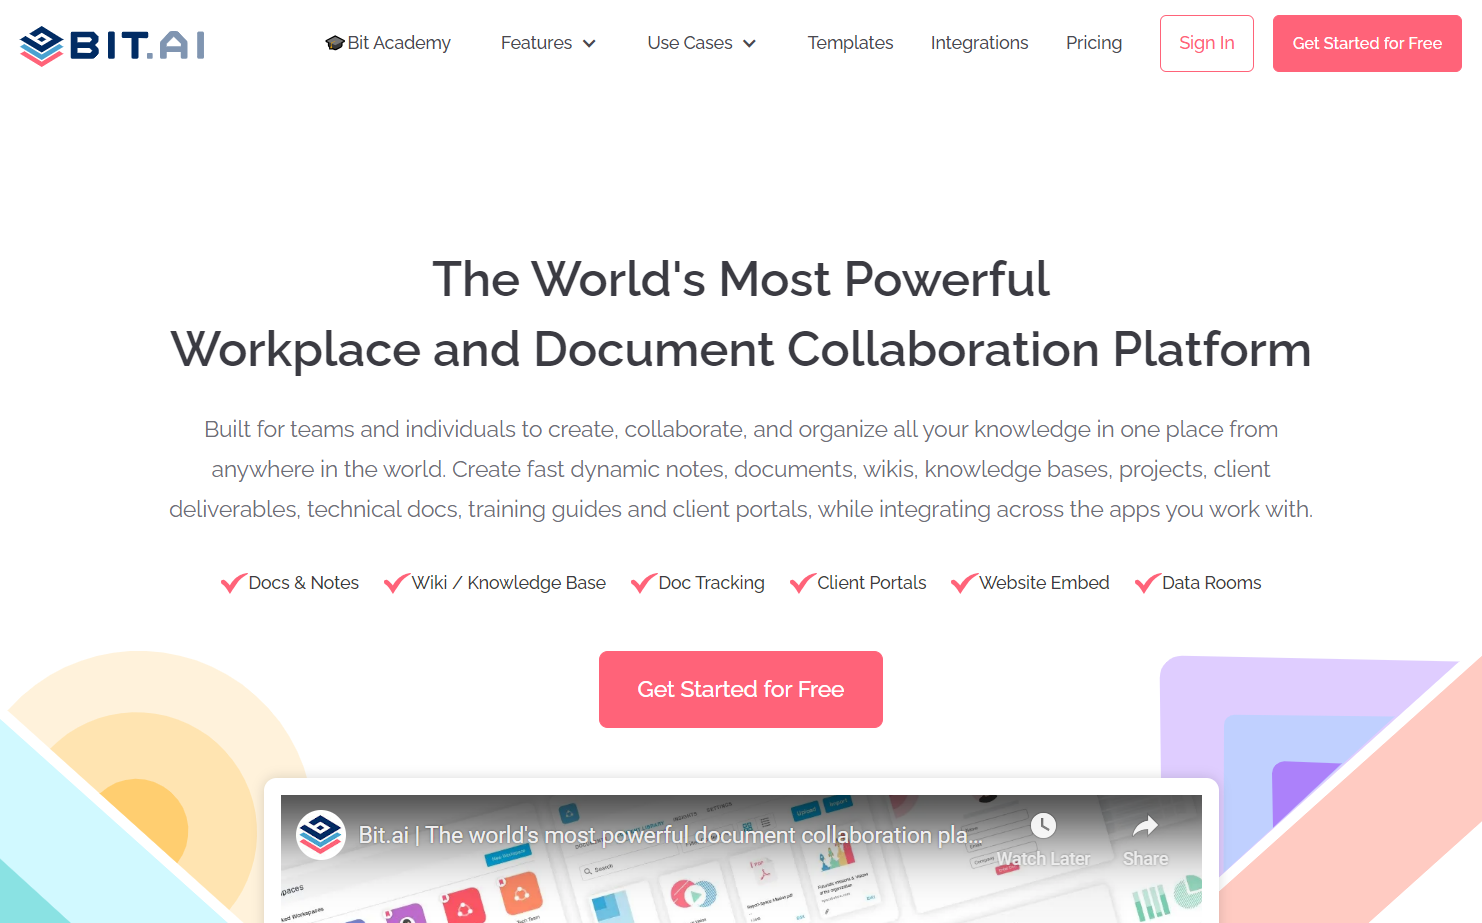 Bit.ai homepage with text saying “The World’s Most Powerful Workplace and Document Collaboration Platform.”